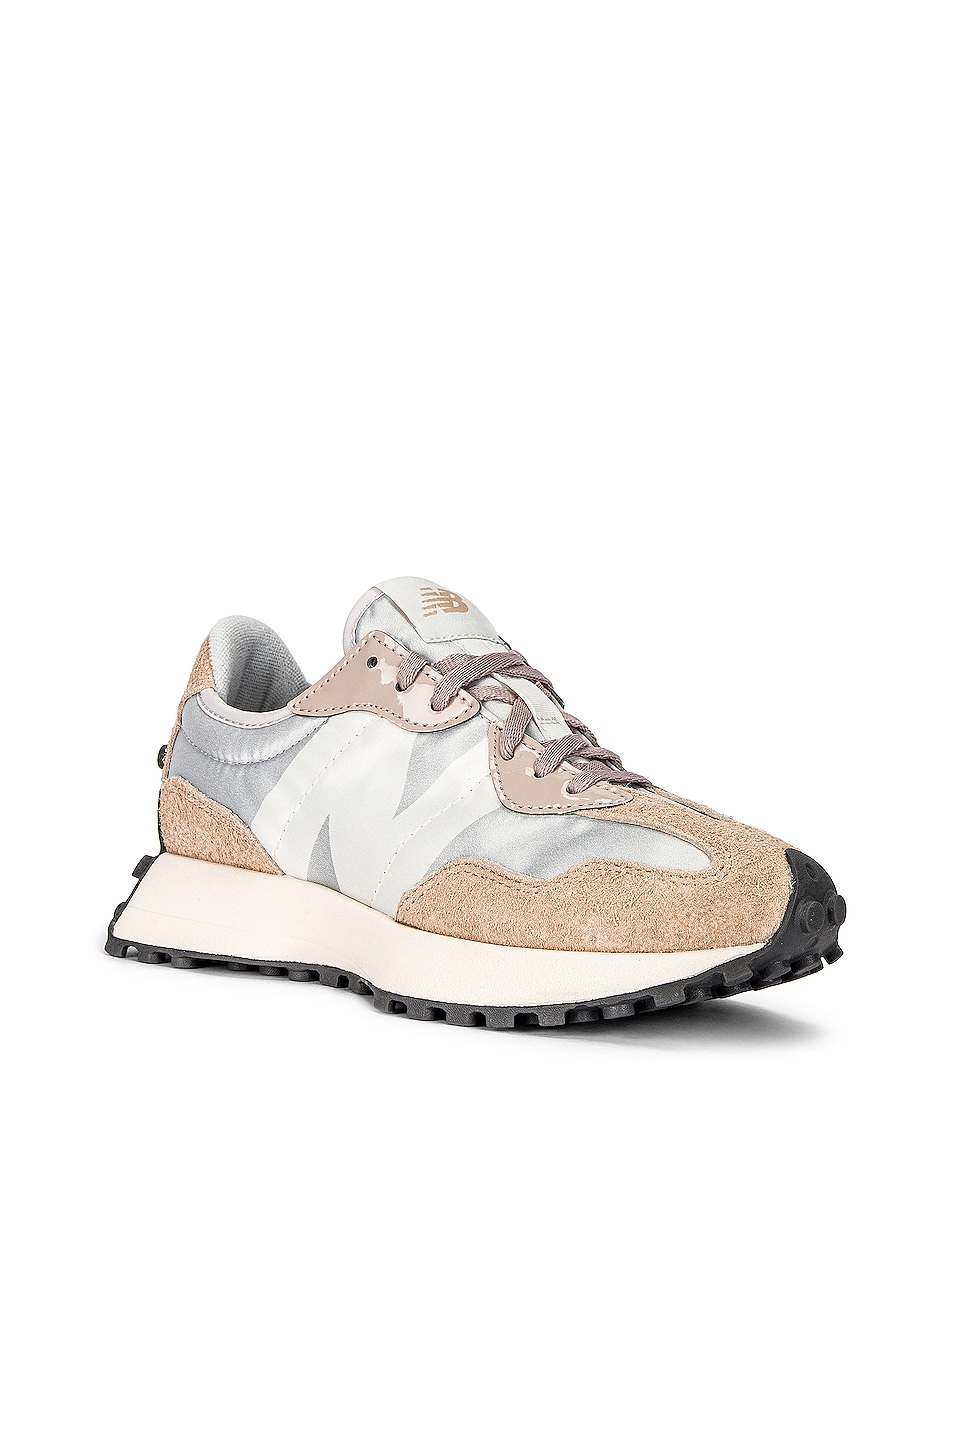 New Balance 327 Sneakers in Neutral | FWRD